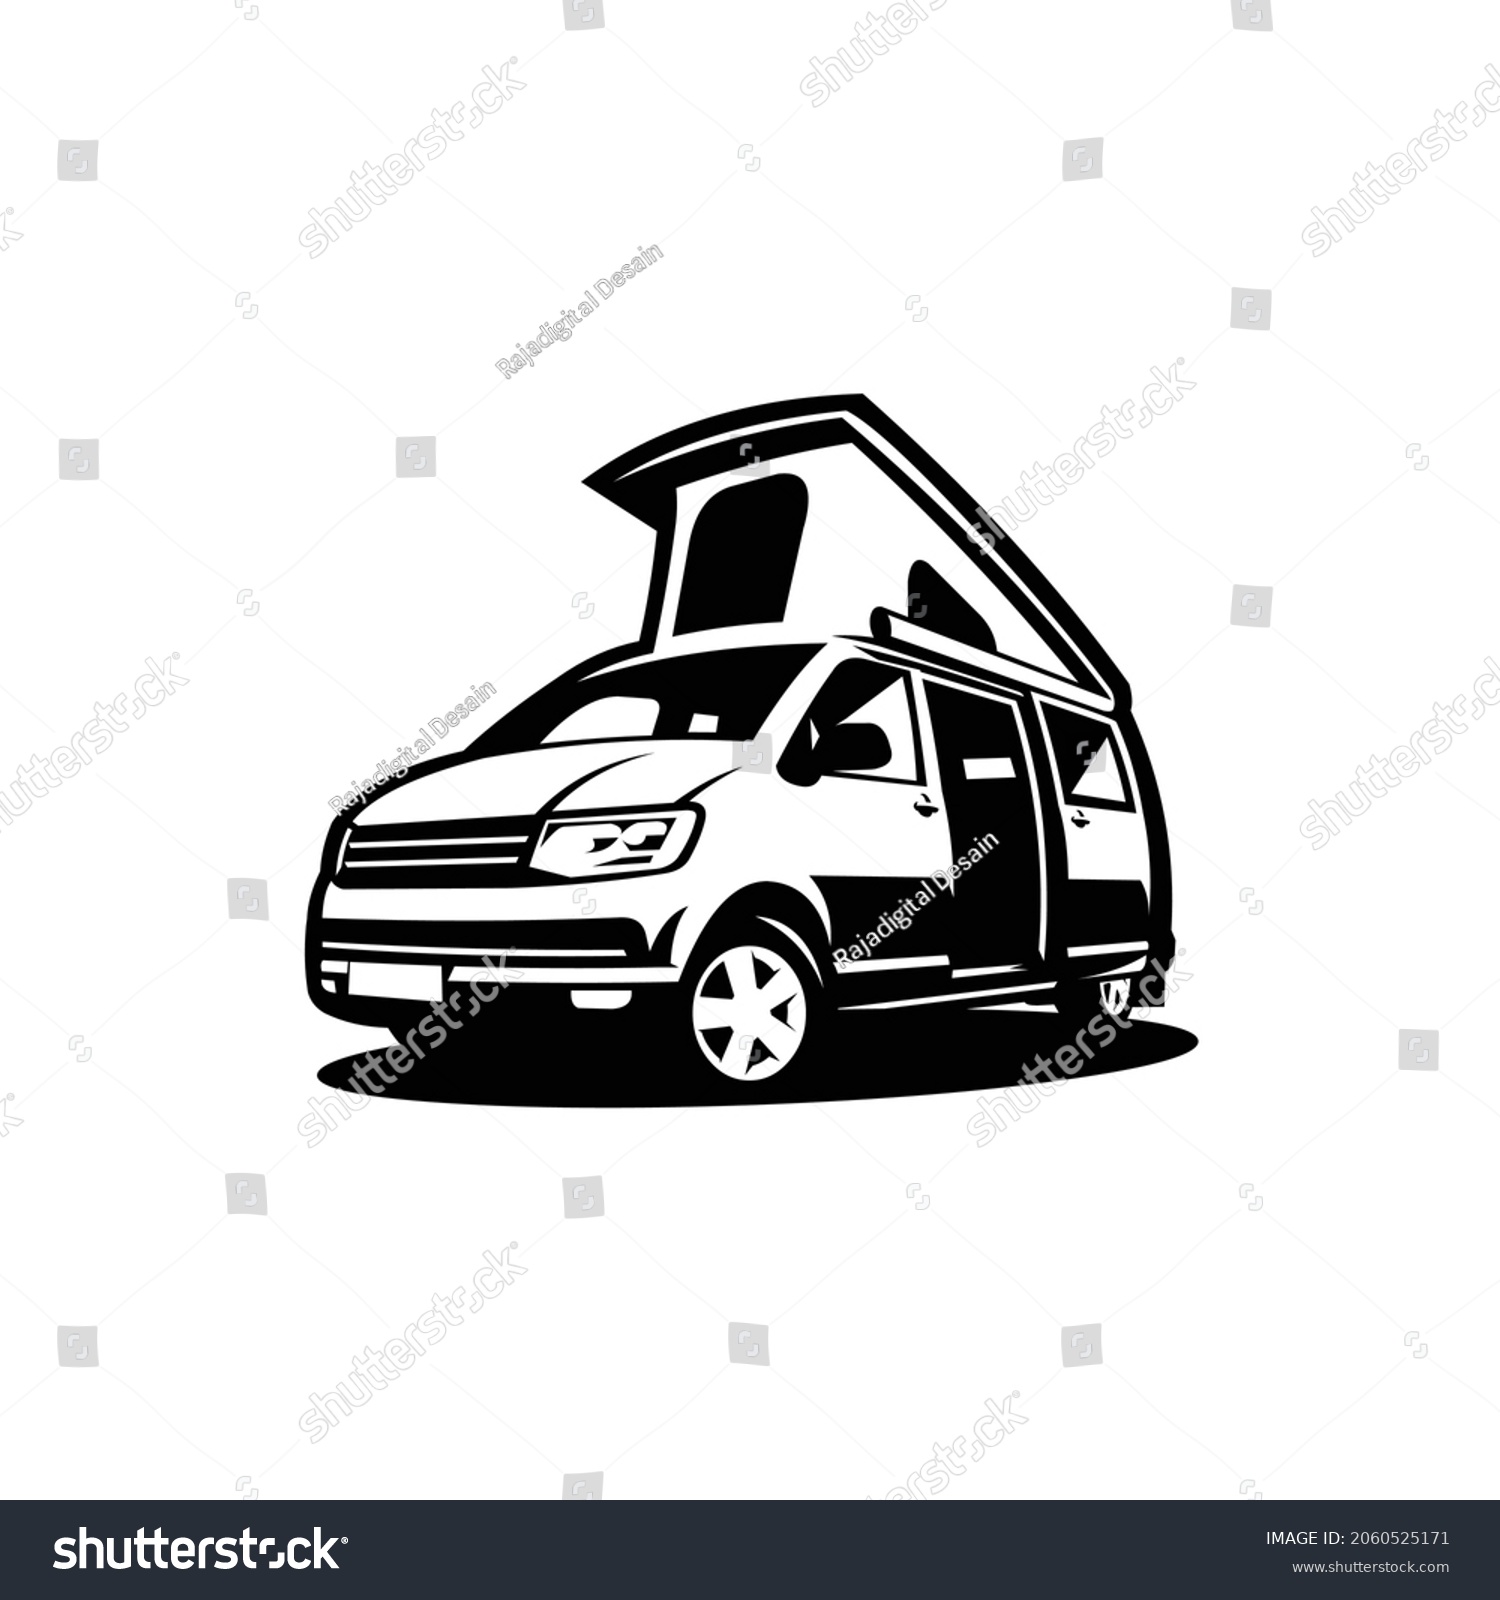 SVG of Campervan silhouette vector isolated in white background. Black and white color campervan svg